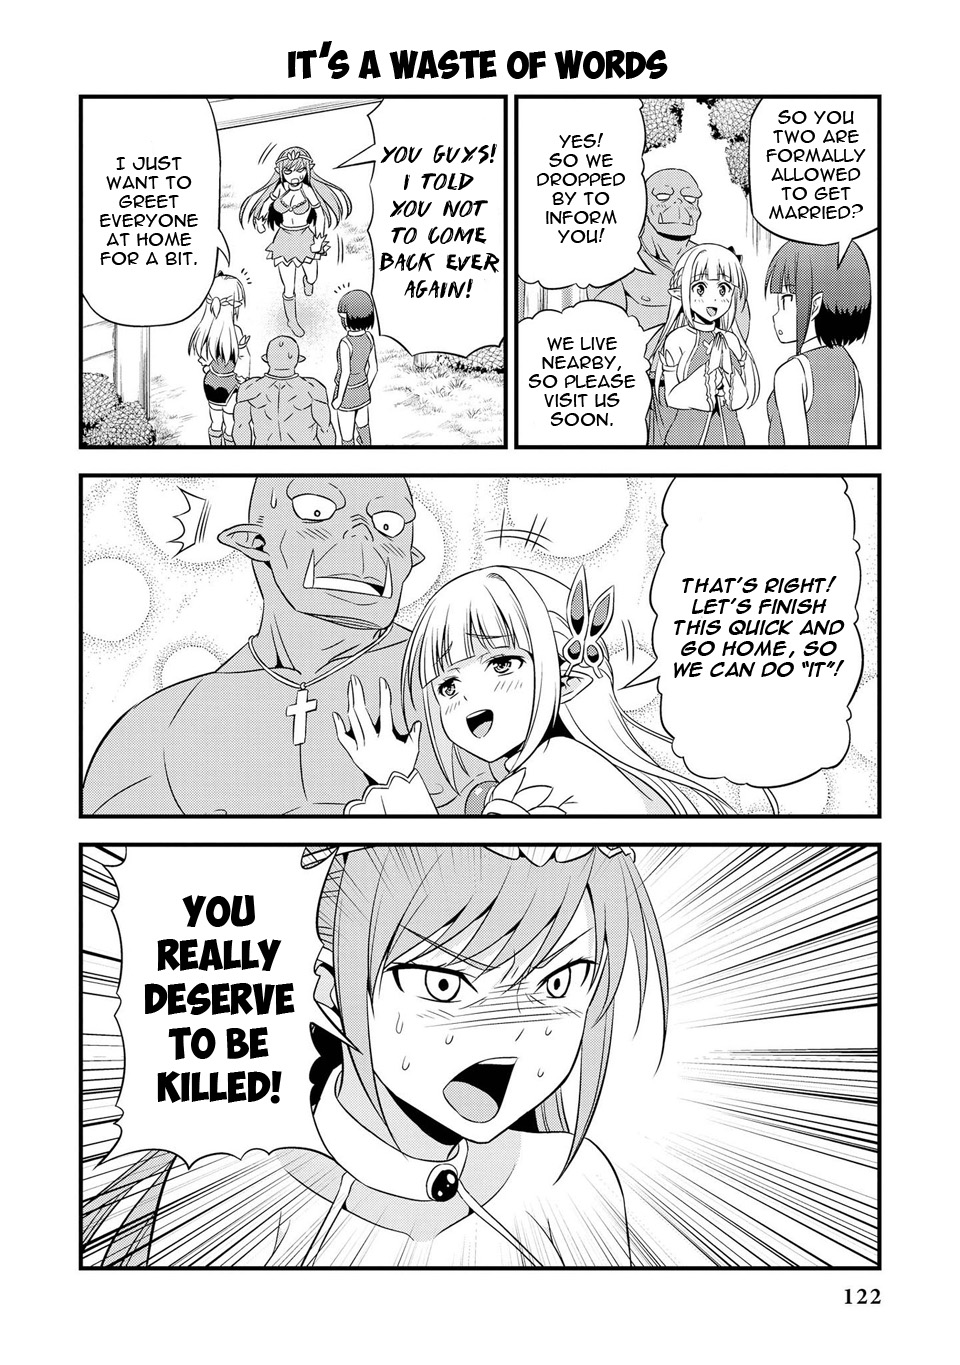 Hentai Elf to Majime Orc Vol. 4 Ch. 8.5 The Orc comes to the Village again